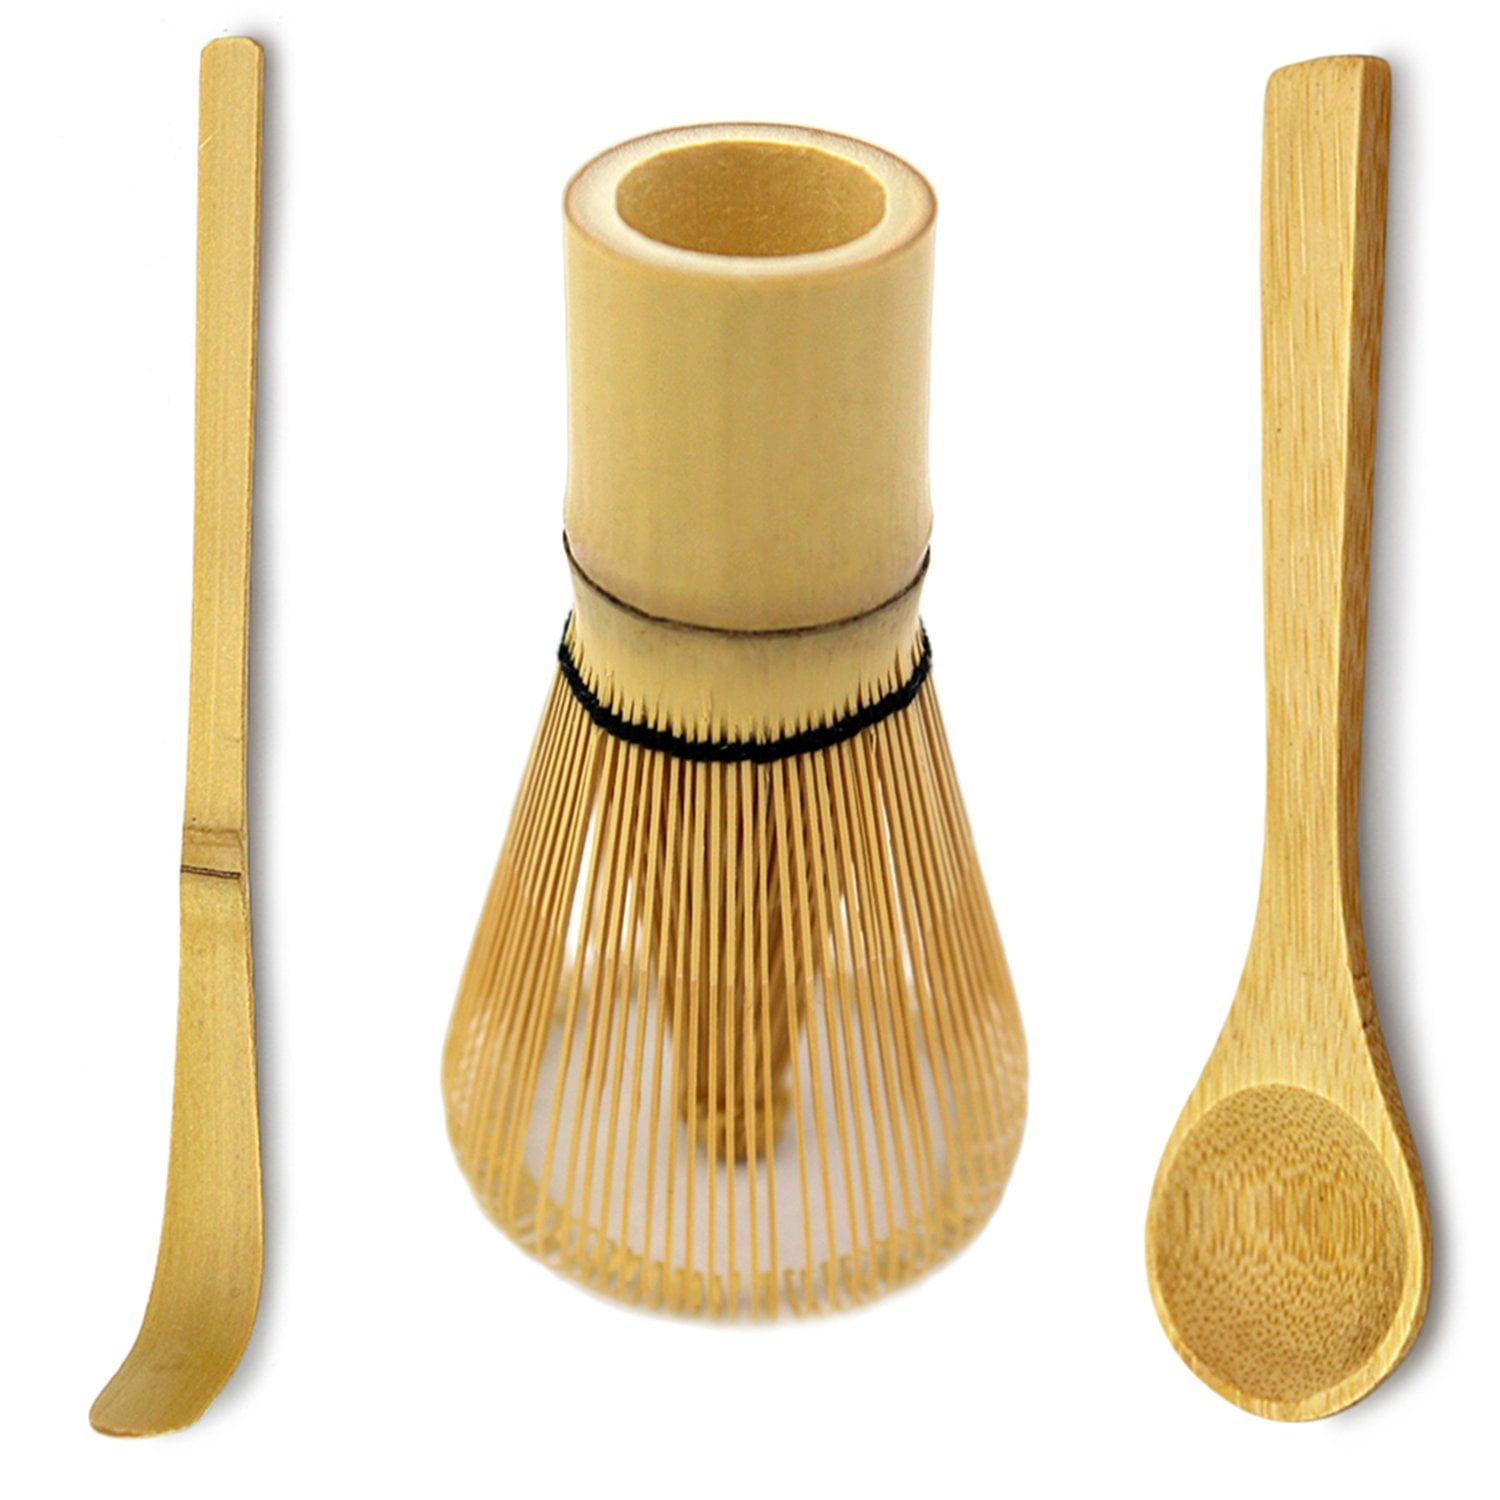 Whisk + Scoop & Spoon Matcha Whisk Sets